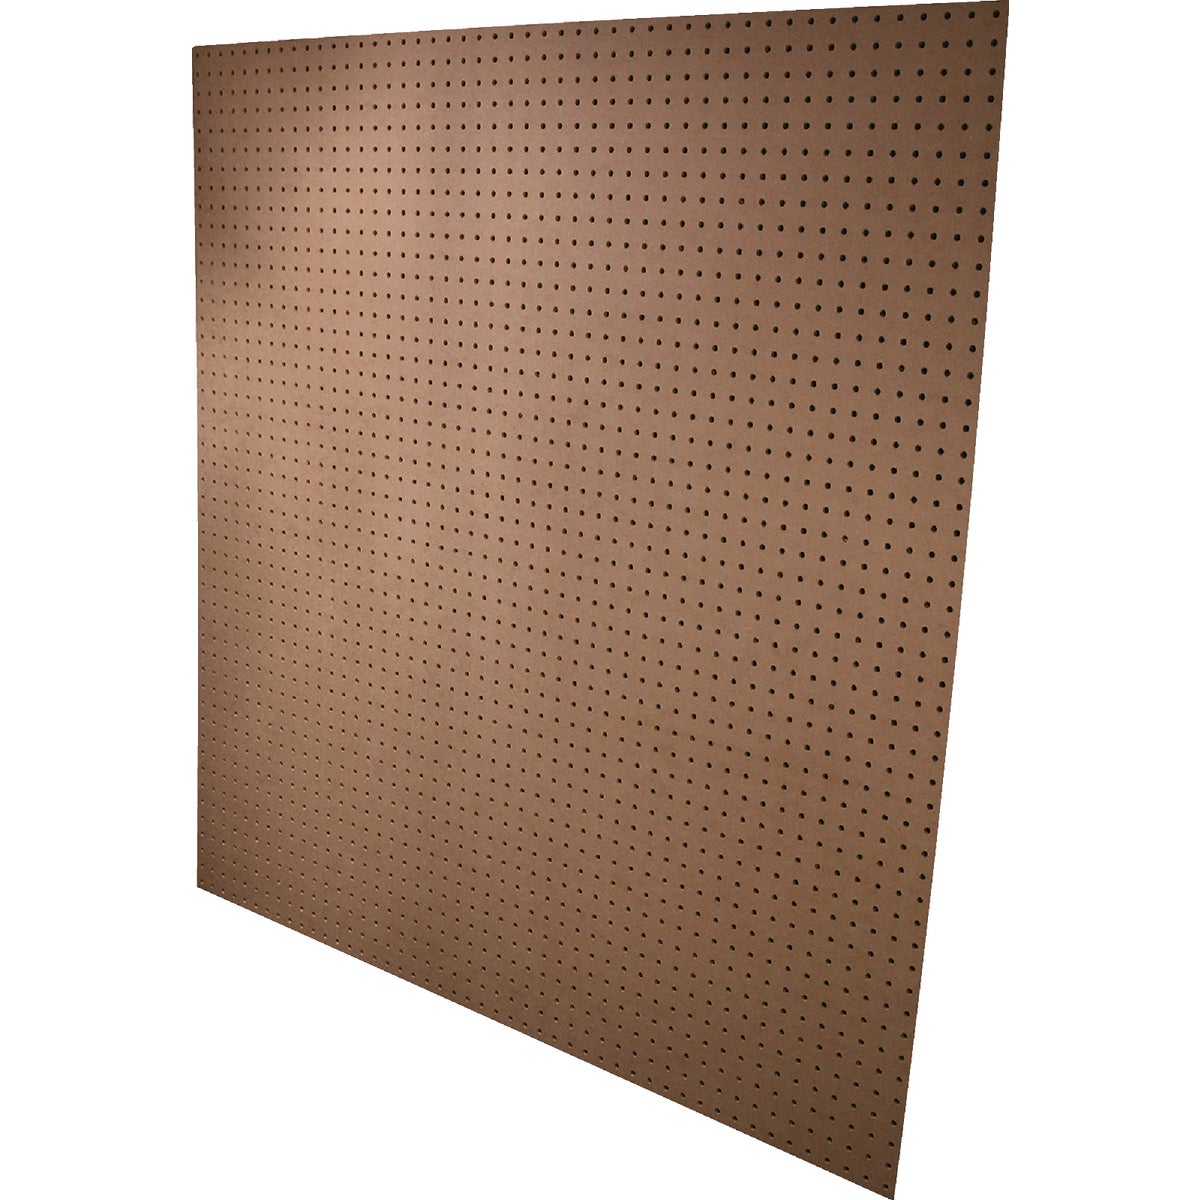 Alexandria Moulding 4 Ft. x 4 Ft. x 3/16 In. Brown MDF Pegboard